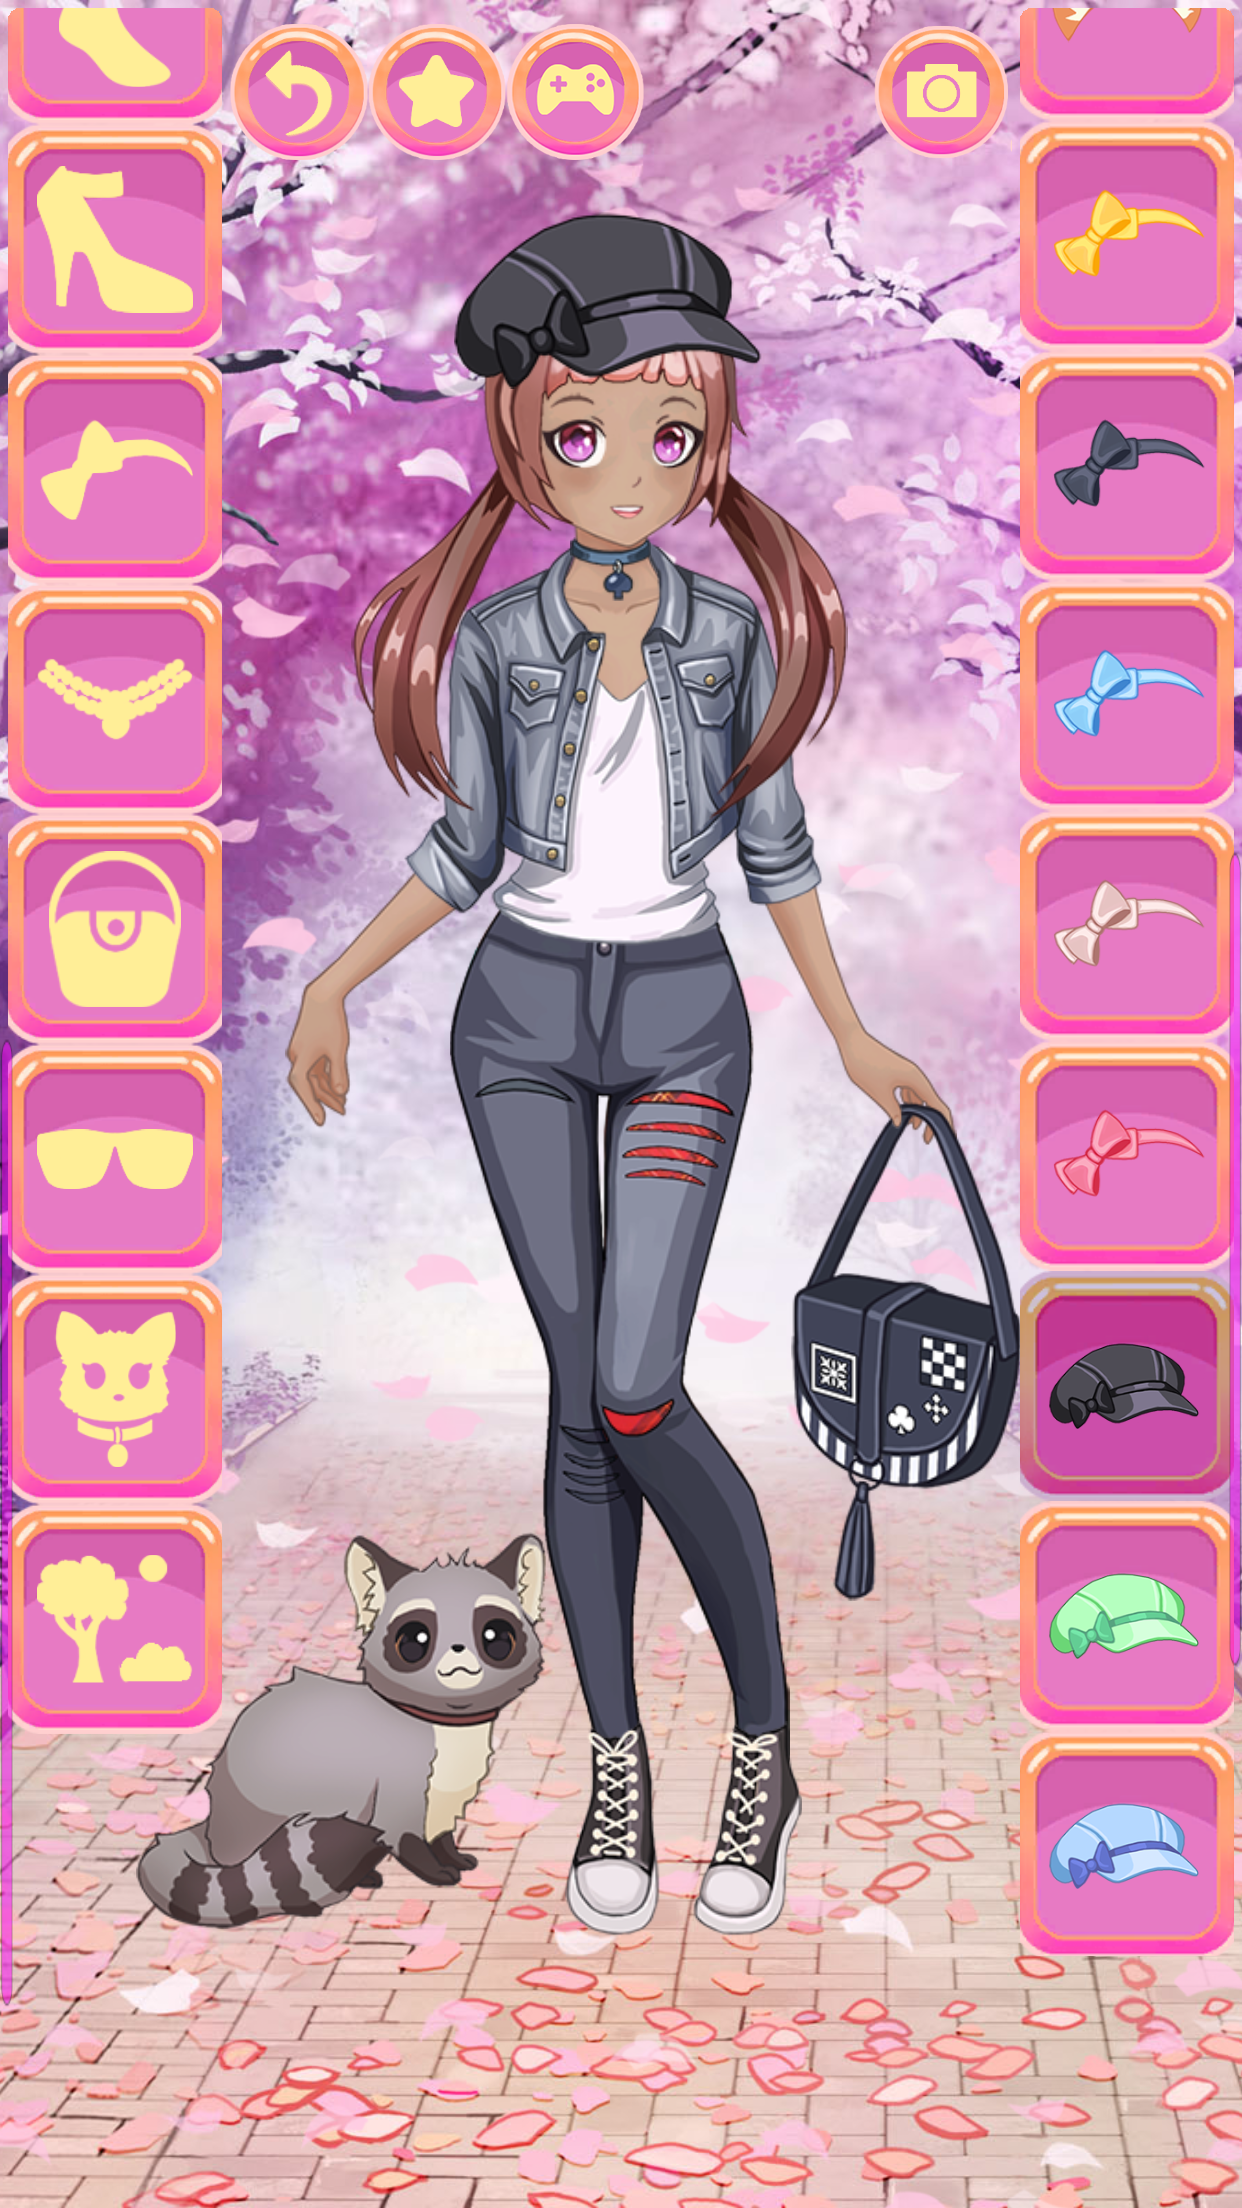 Anime Dress Up — play online for free on Yandex Games